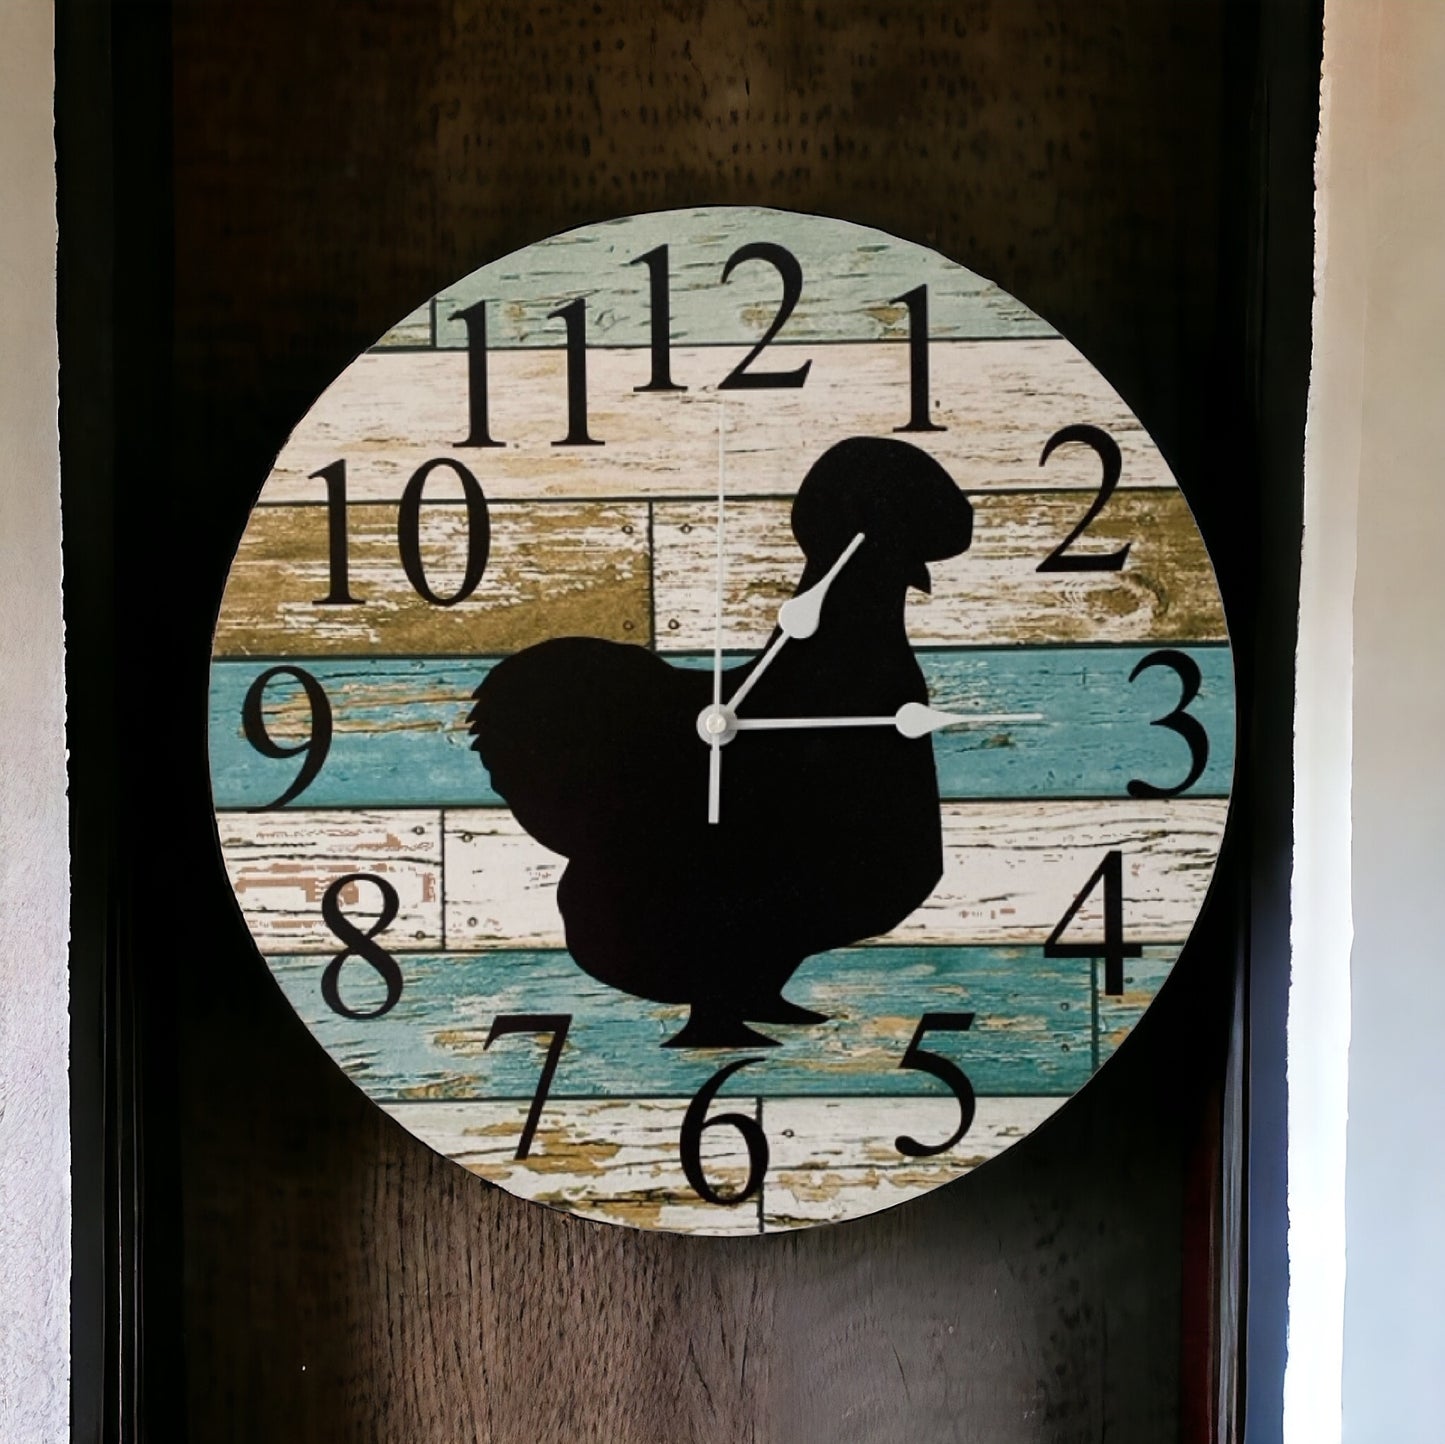 Clock Wall Silkie Chicken Country Aussie Made - The Renmy Store Homewares & Gifts 